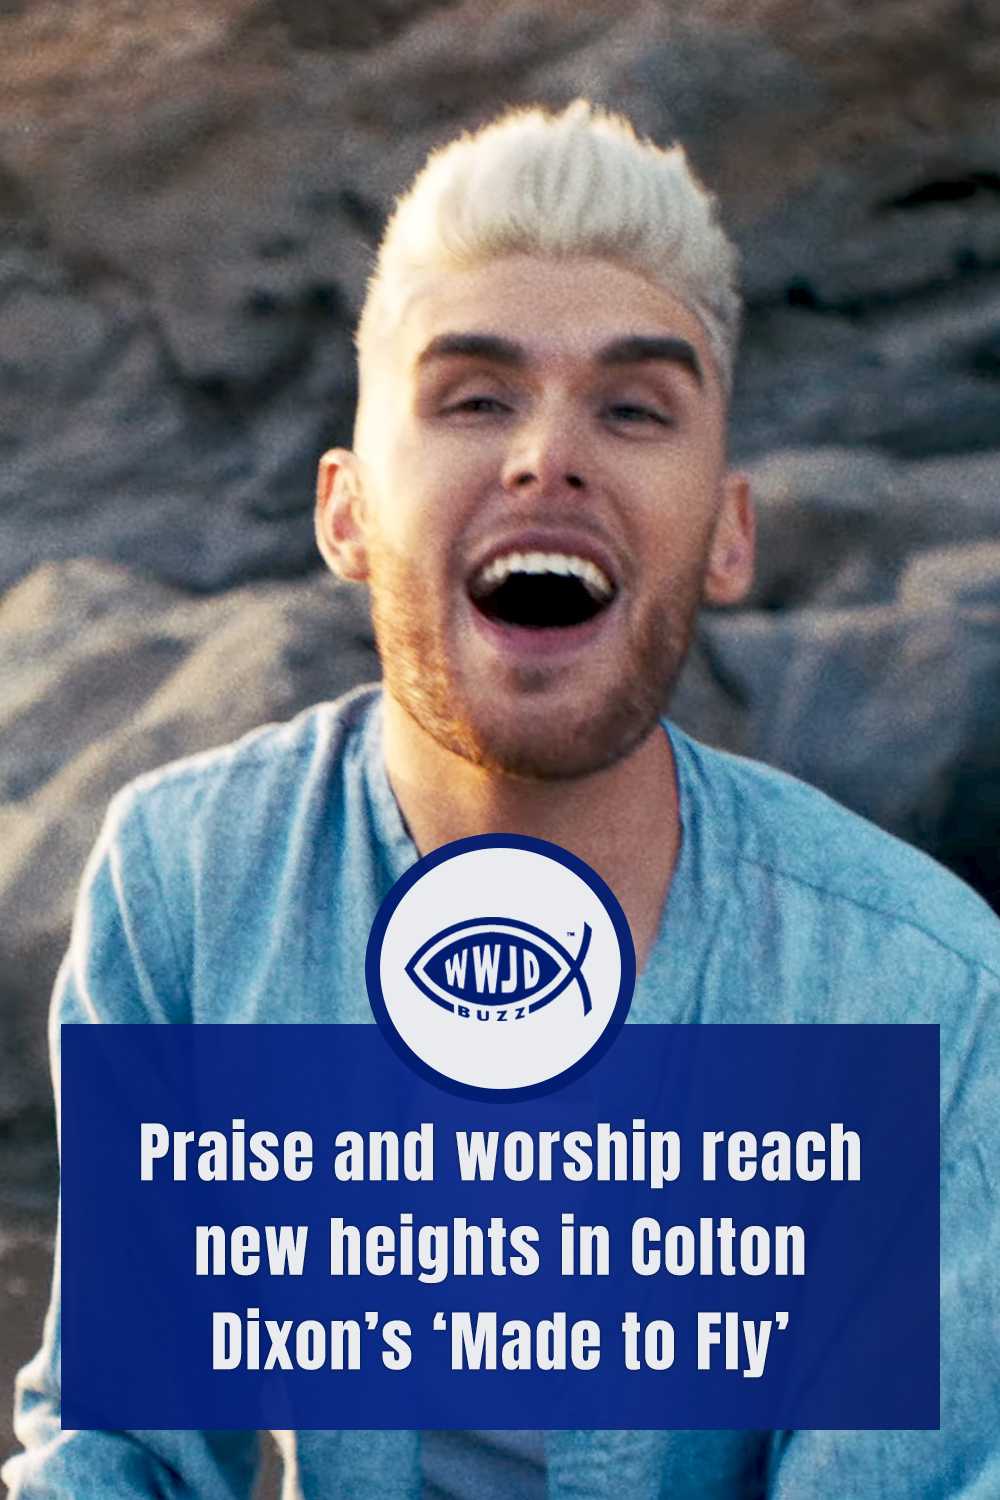 Praise and worship reach new heights in Colton Dixon’s ‘Made to Fly’